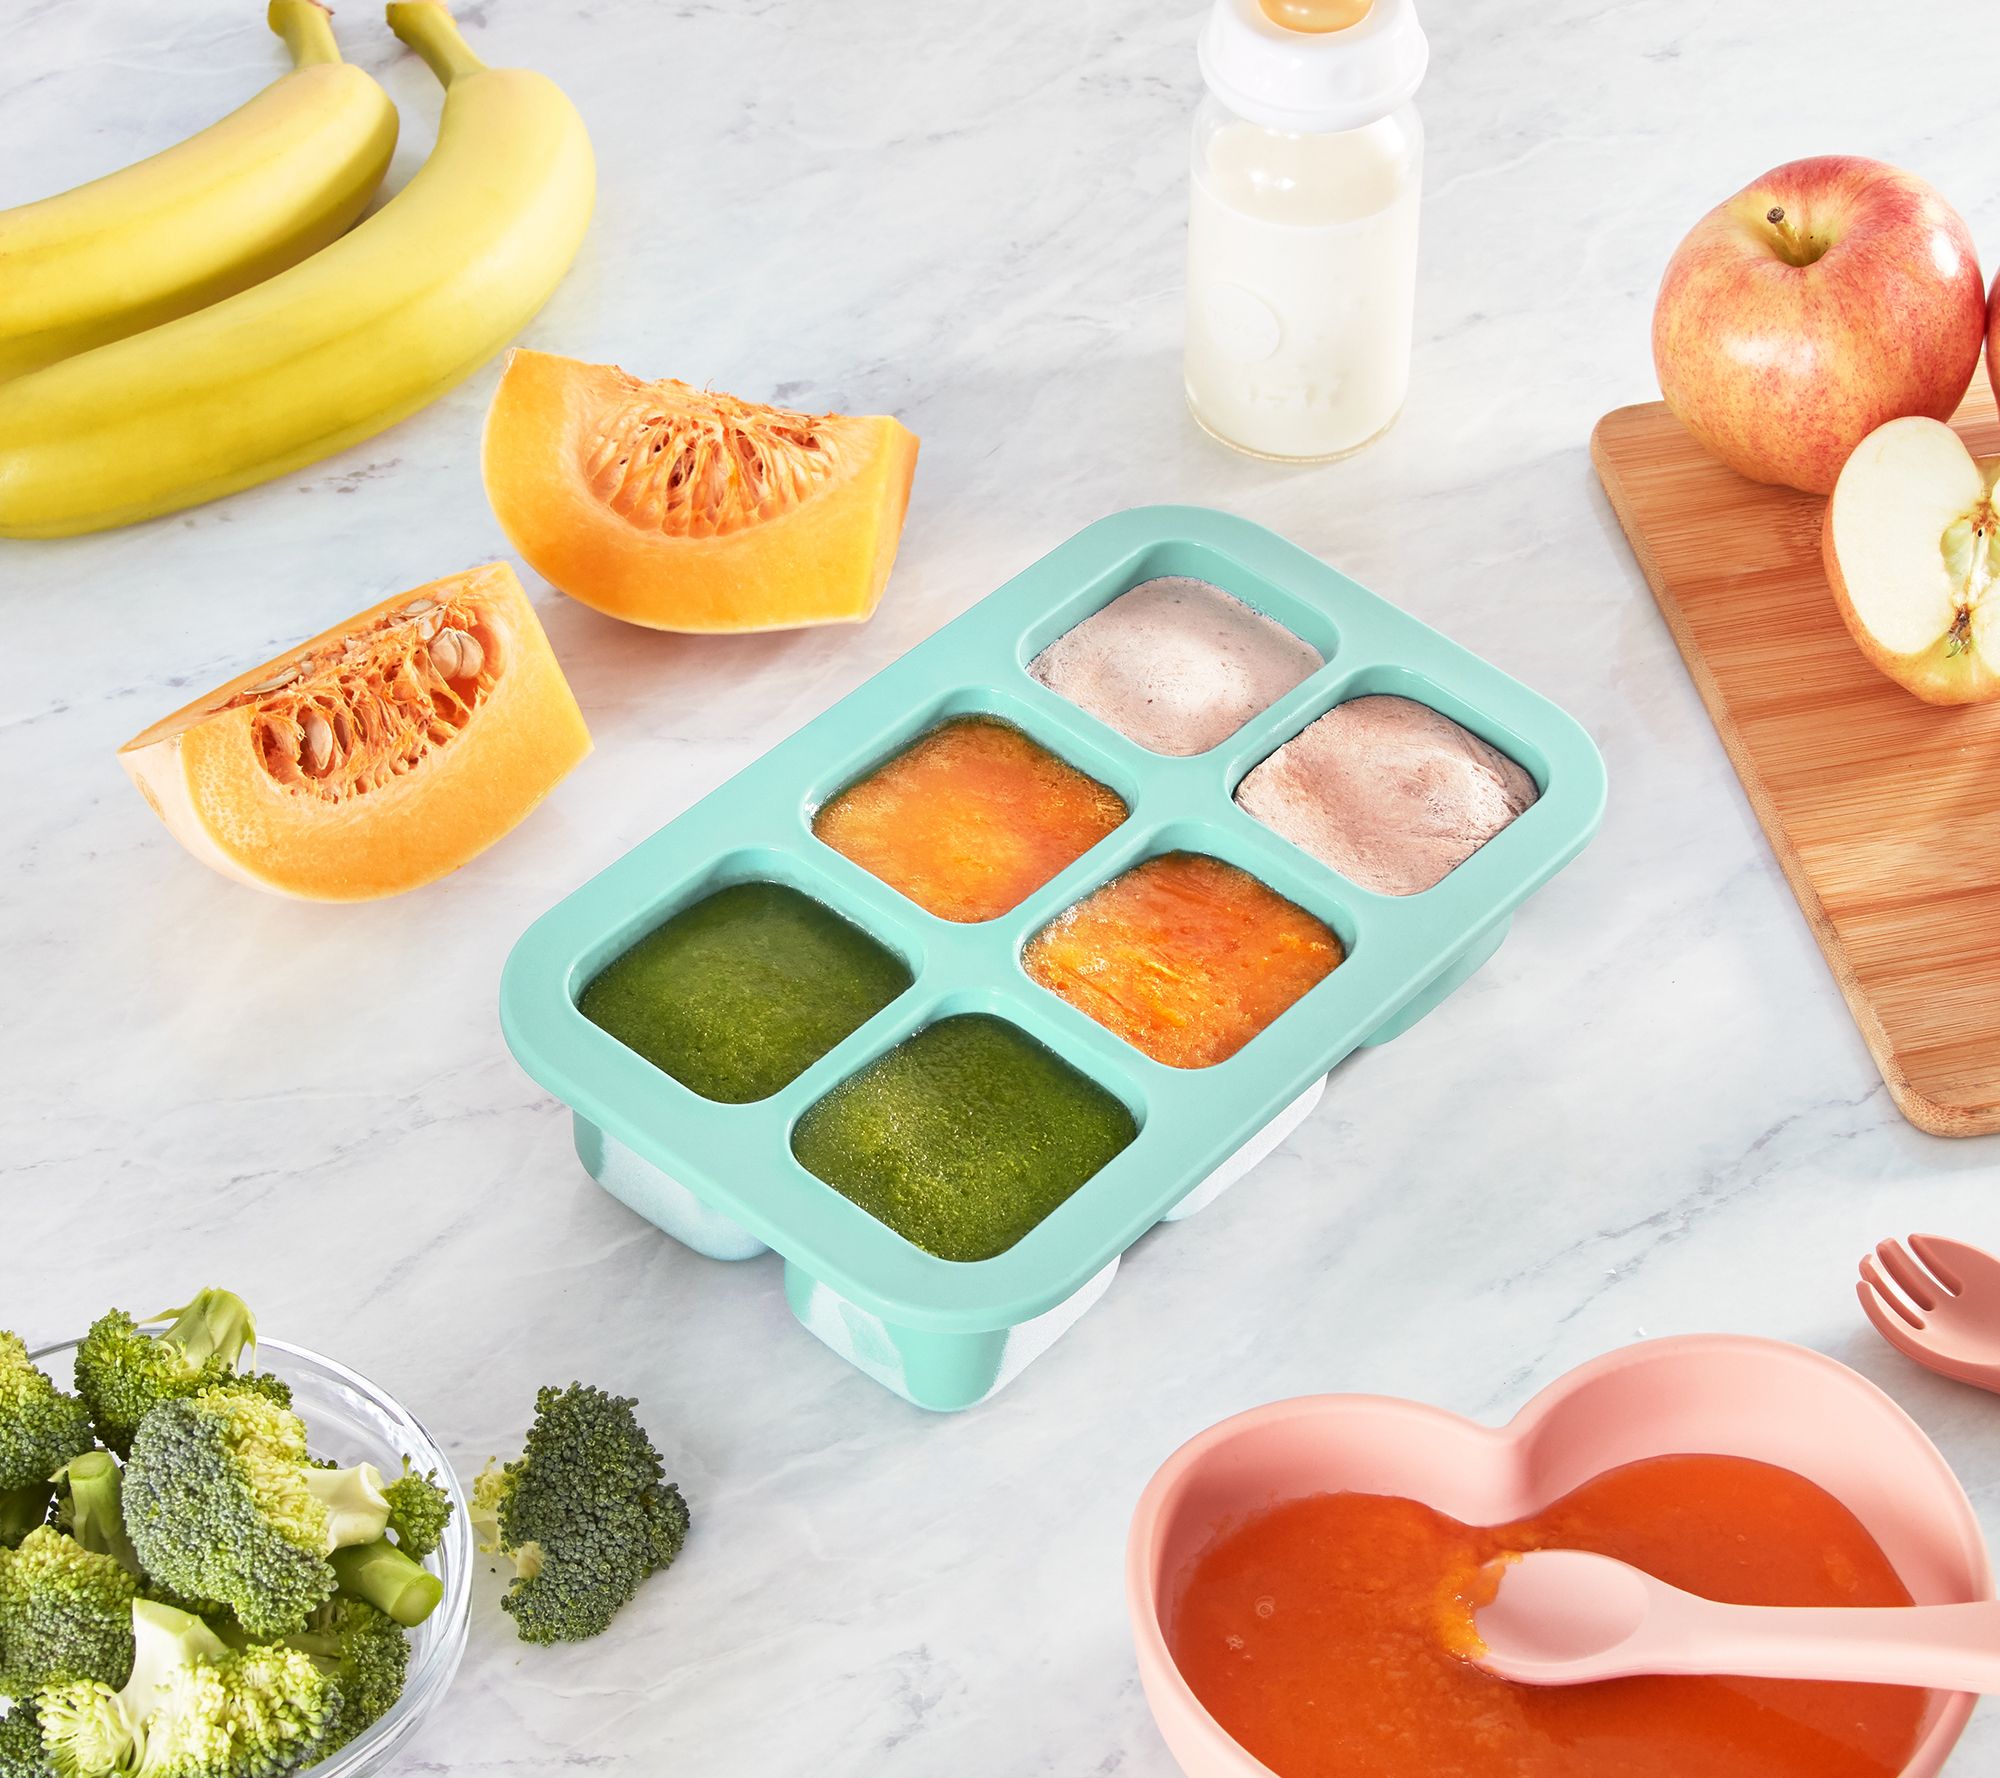 If You Make Your Own Baby Food, You Need This Silicone Freezer Tray